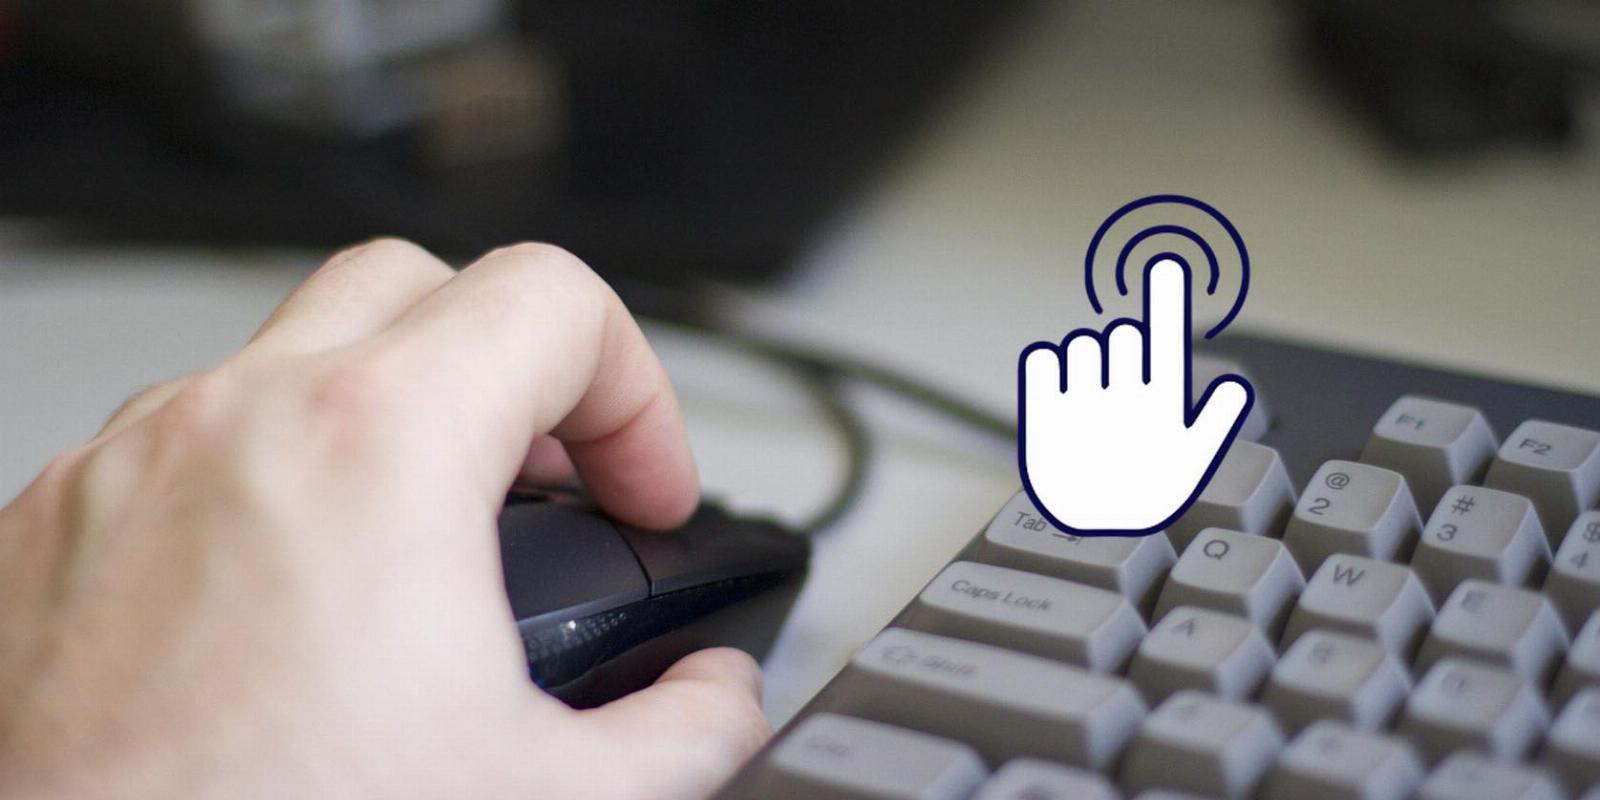 How to Change Your Cursor on Windows